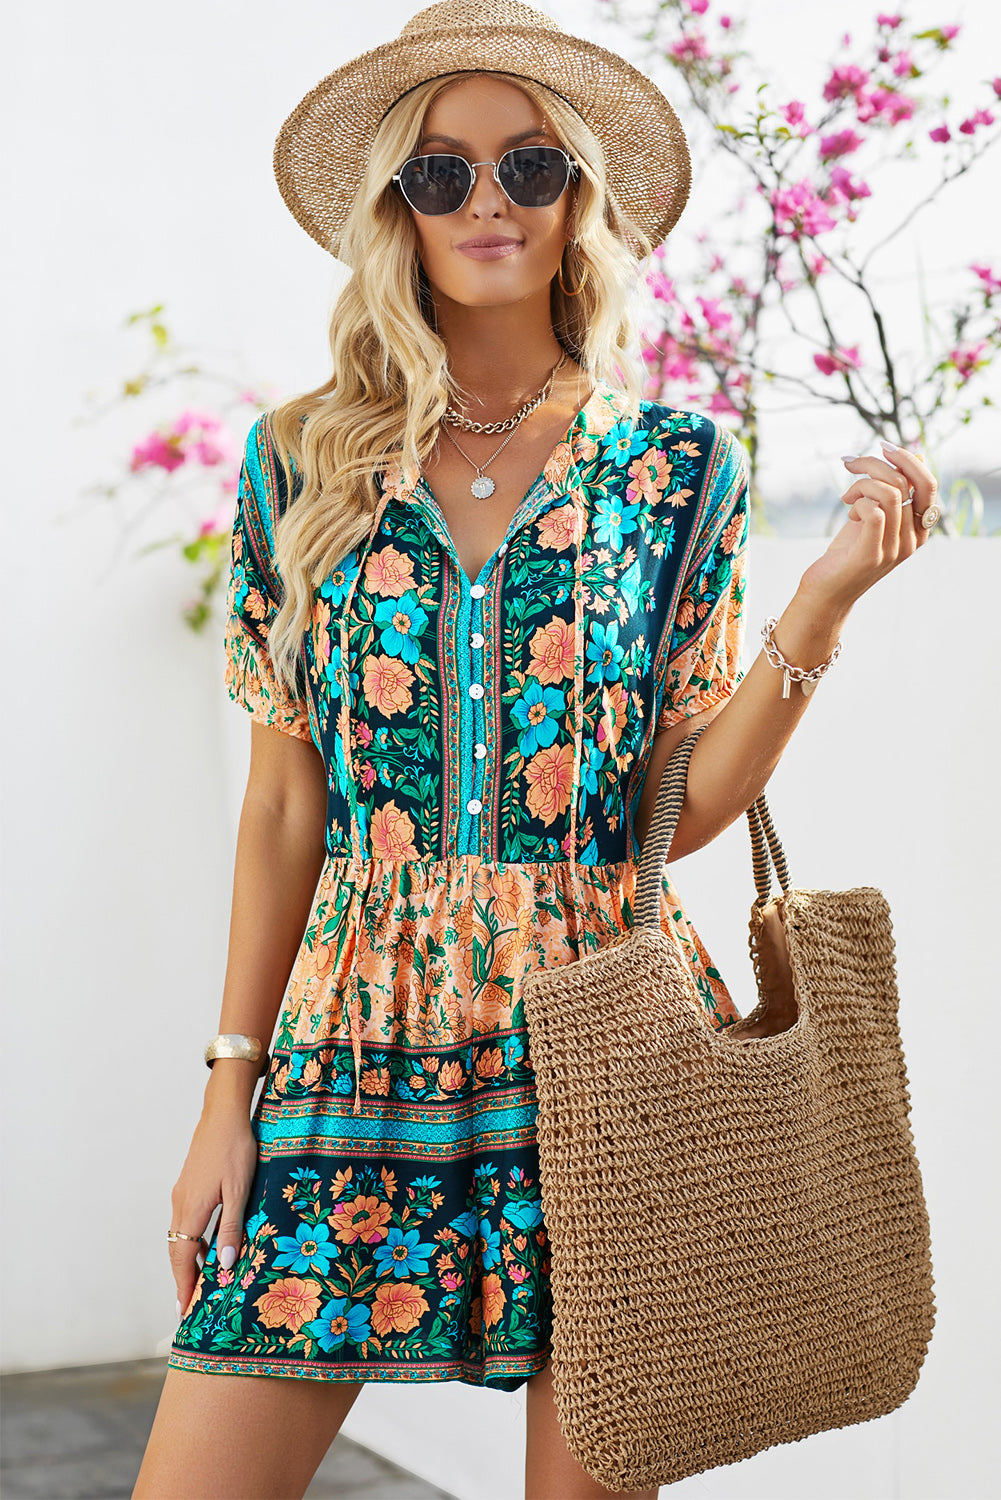 EVELYN Floral Multicolored Tie-Neck Romper